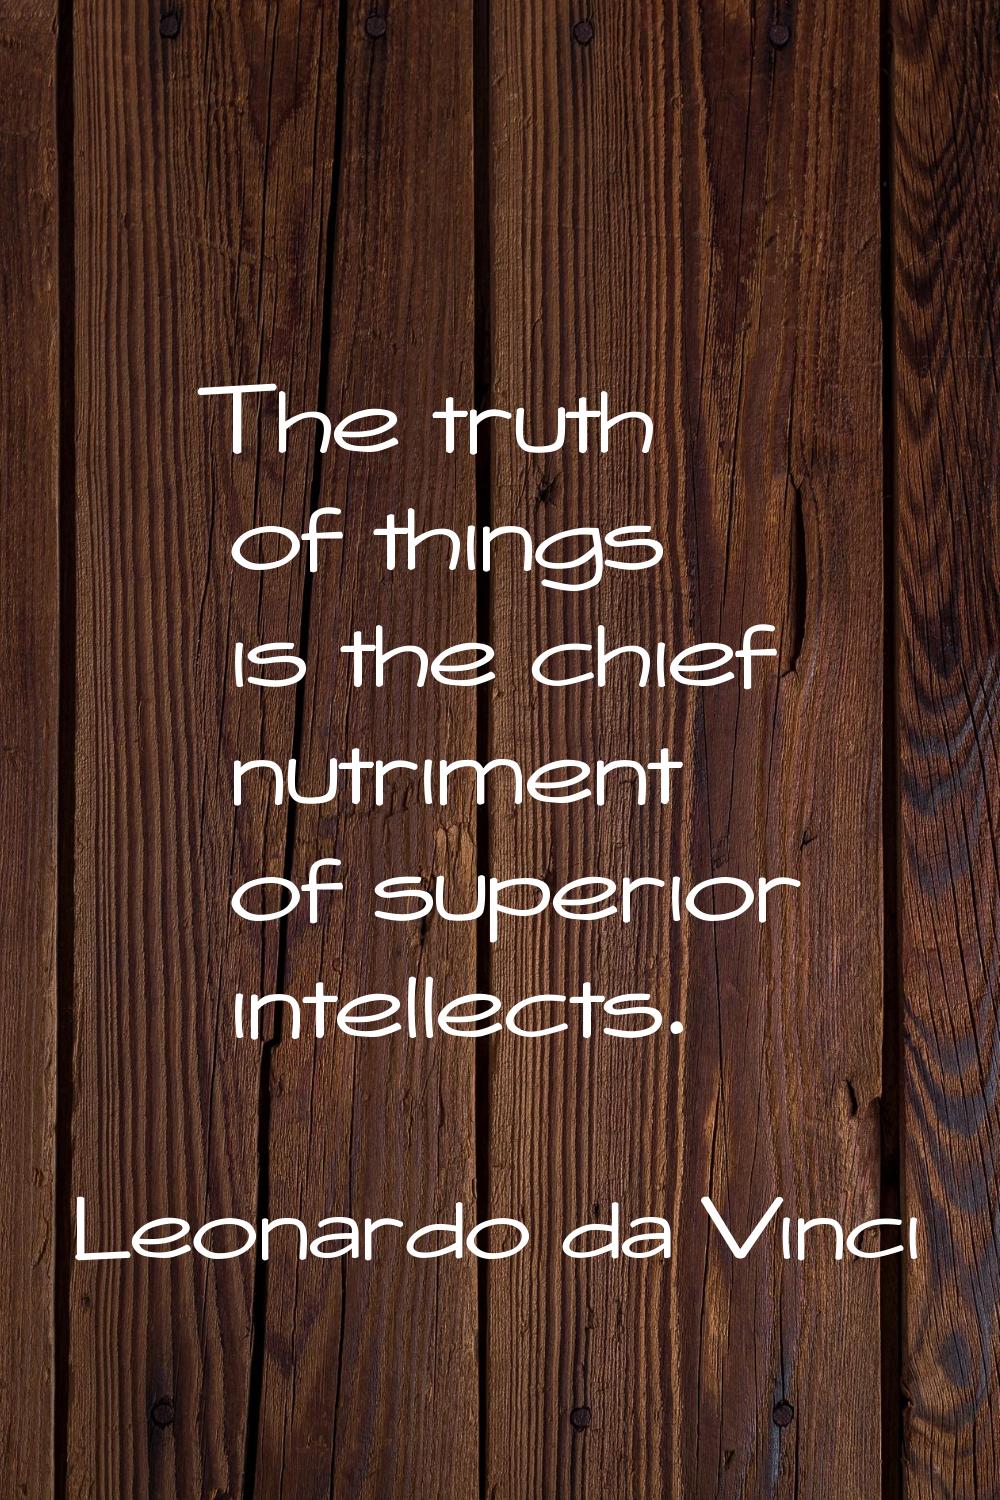 The truth of things is the chief nutriment of superior intellects.